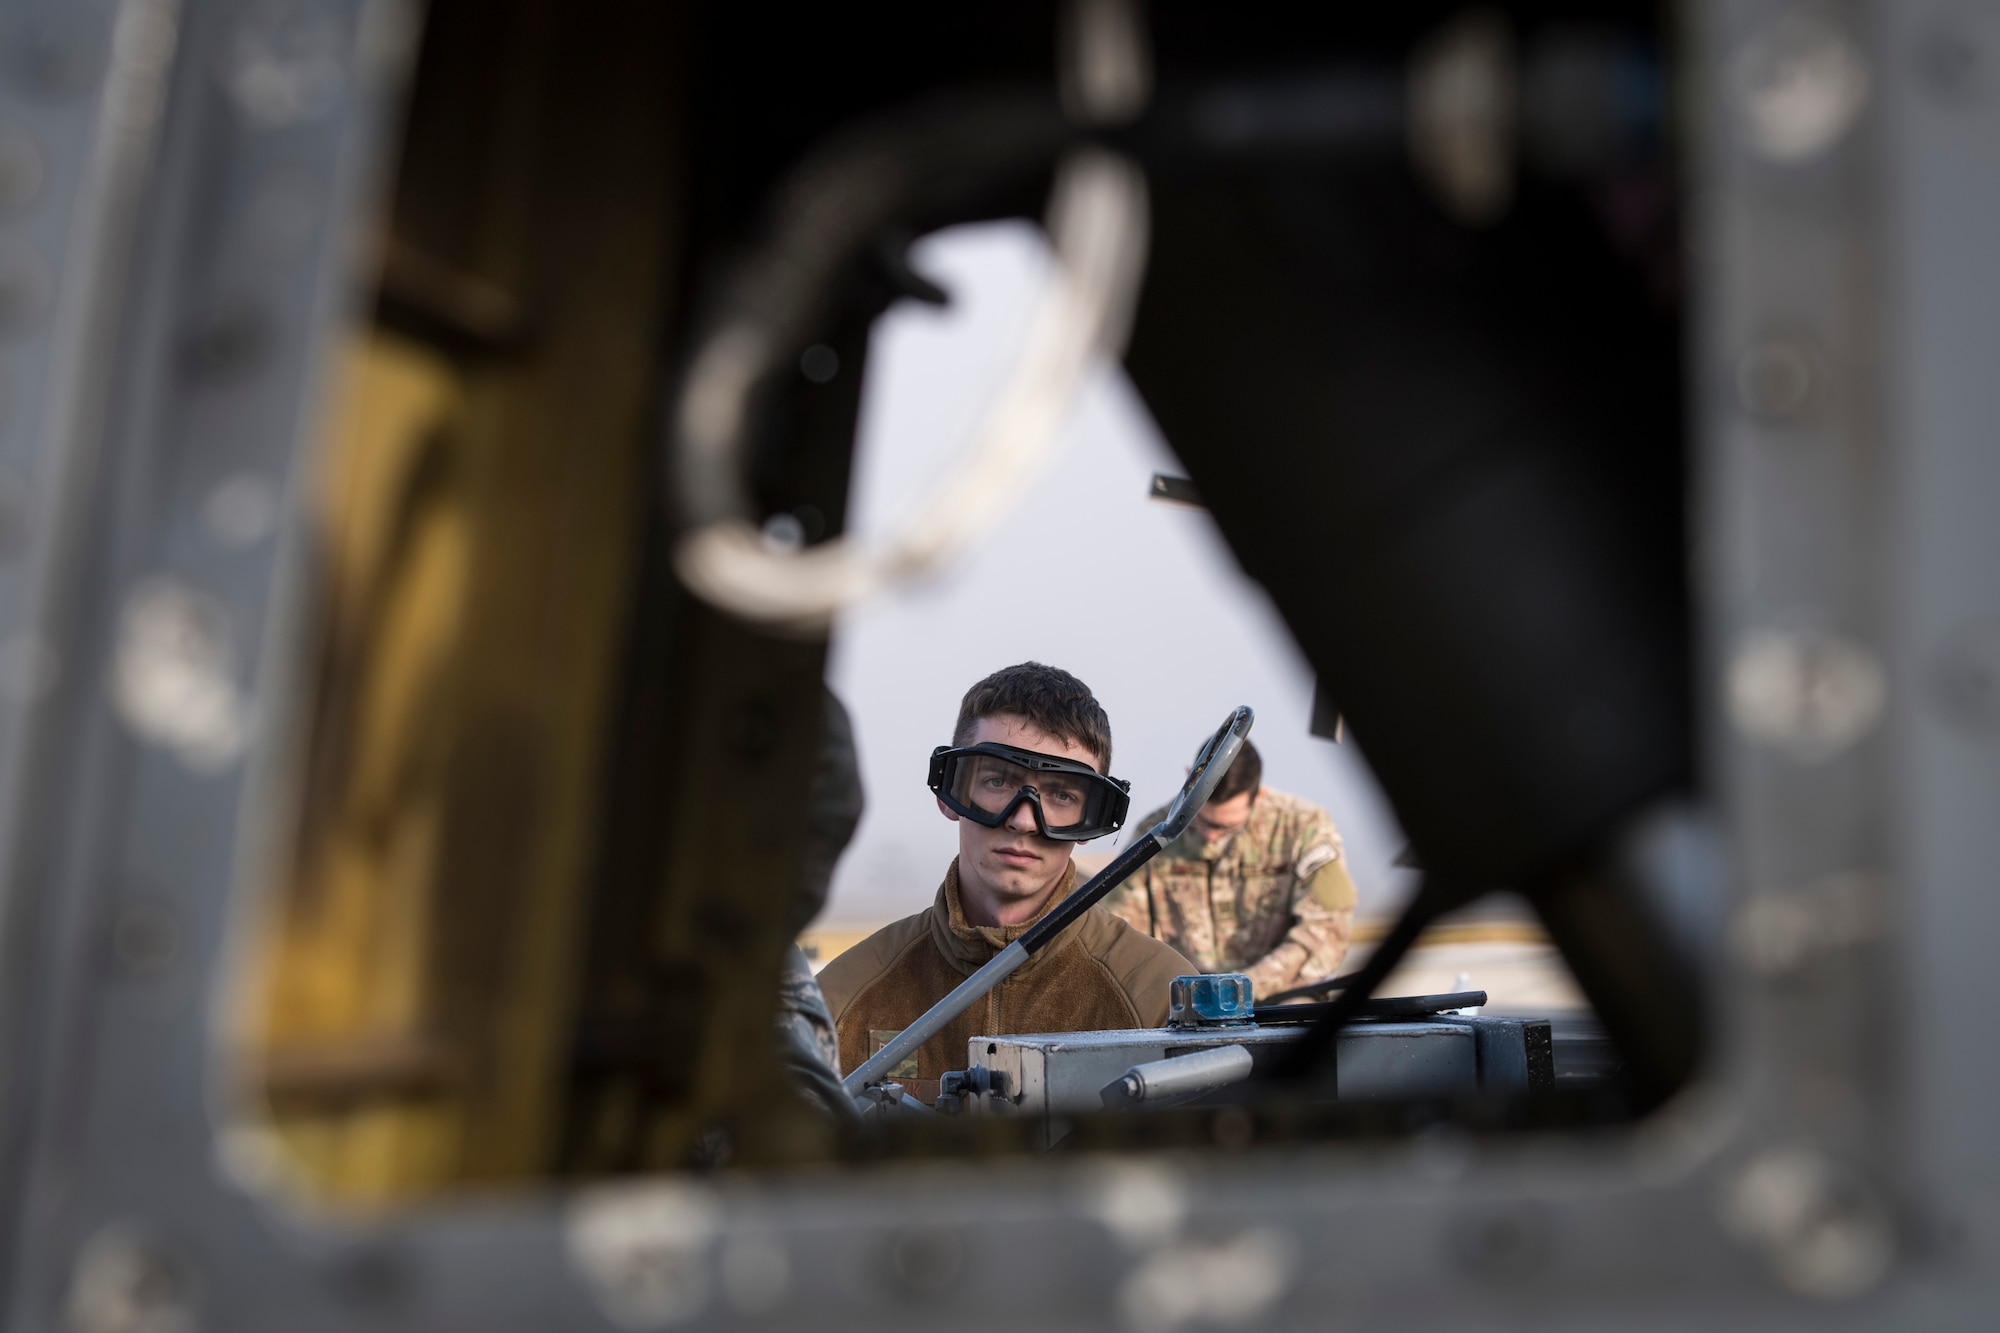 Senior Airman Nicholas Dacyk, 723d Aircraft Maintenance Squadron hydraulics systems apprentice, drains hydraulic fluid from an HH-60G Pave Hawk during an exercise, Dec. 5, 2017, at Moody Air Force Base, Ga. Moody’s Phase 1, Phase 2 exercise tested the 23d Wing’s ability to prepare, deploy and execute their mission at a moment’s notice. The 723d AMXS was tasked with folding HH-60s in preparation for transport in a larger aircraft and unfolding them once they arrive at their final destination. During folding, the rotor blades are revolved and aligned with the body of the helicopter, and fastened into place. (U.S. Air Force photo by Senior Airman Janiqua P. Robinson)